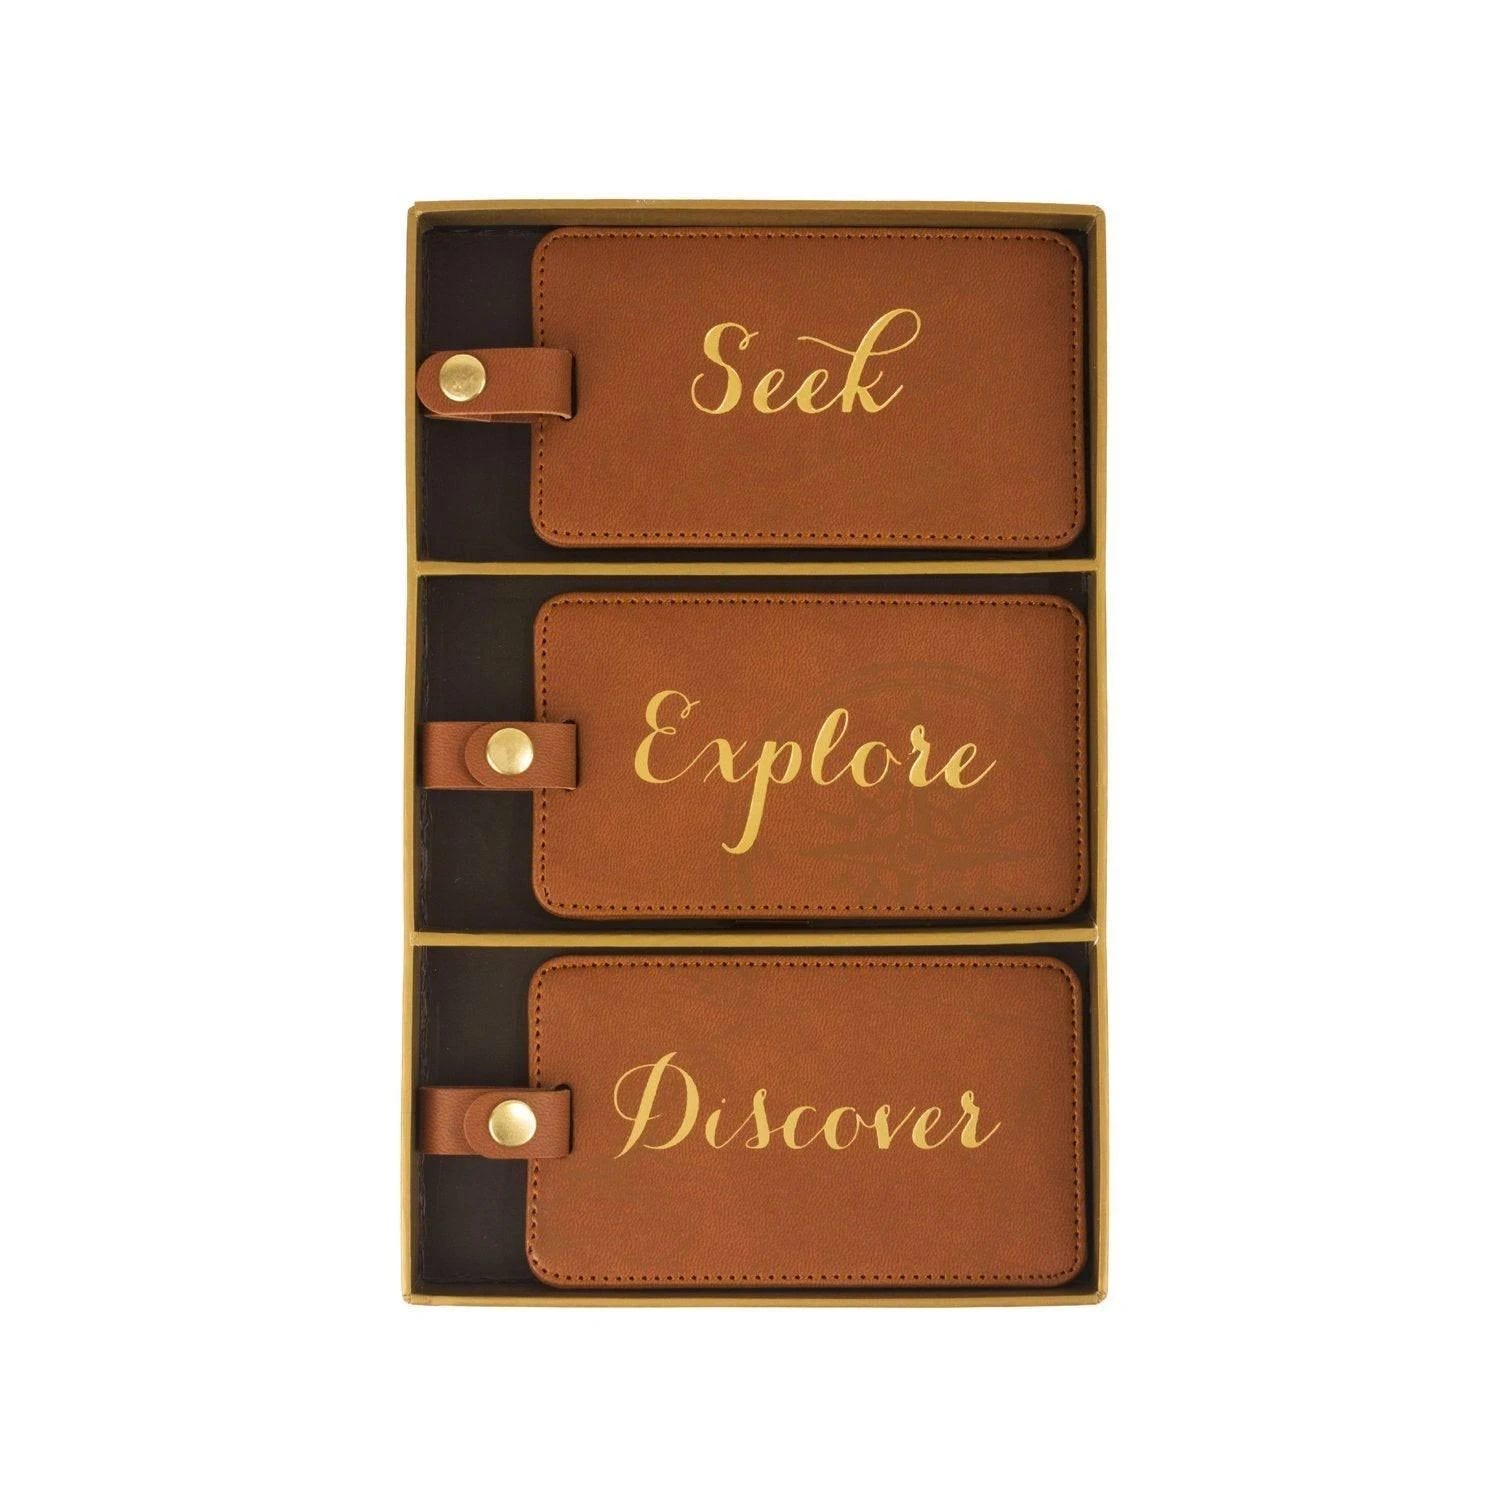 Eccolo Seek Explore Discover Luggage Tags Set of 3 | Image